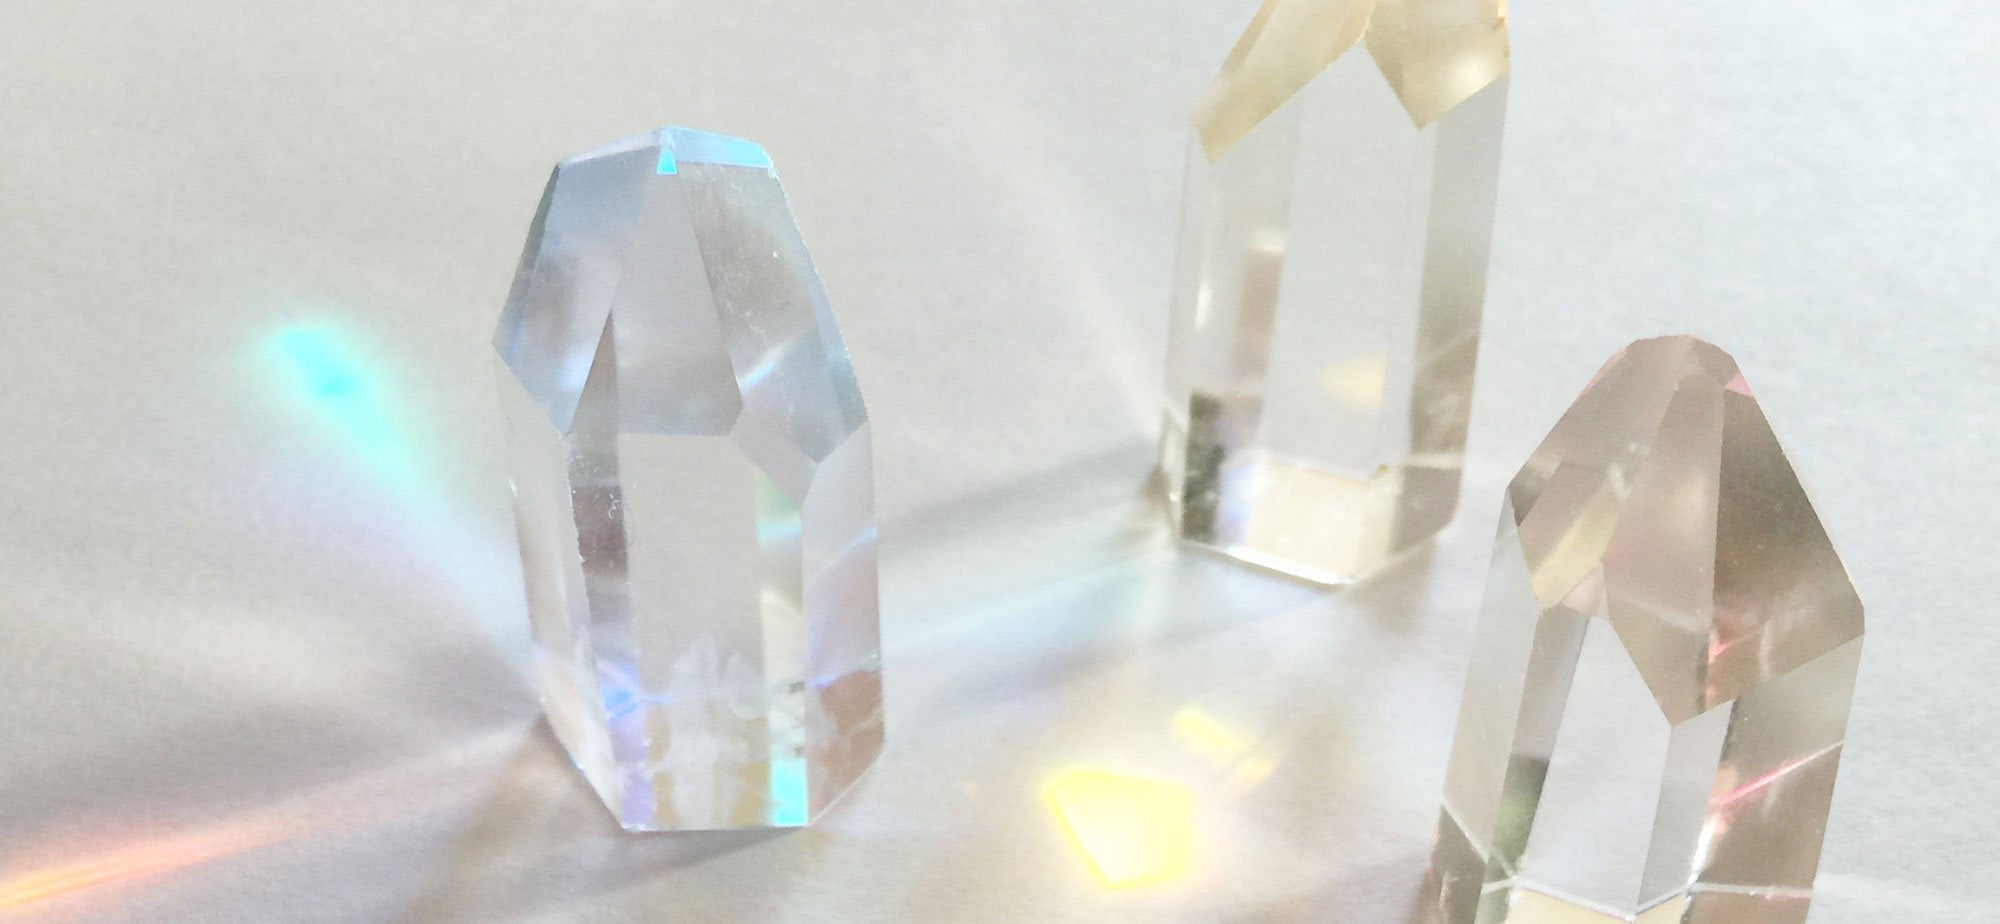 Crystal grid refracting prisms of light, and aiding in healing and manifestation